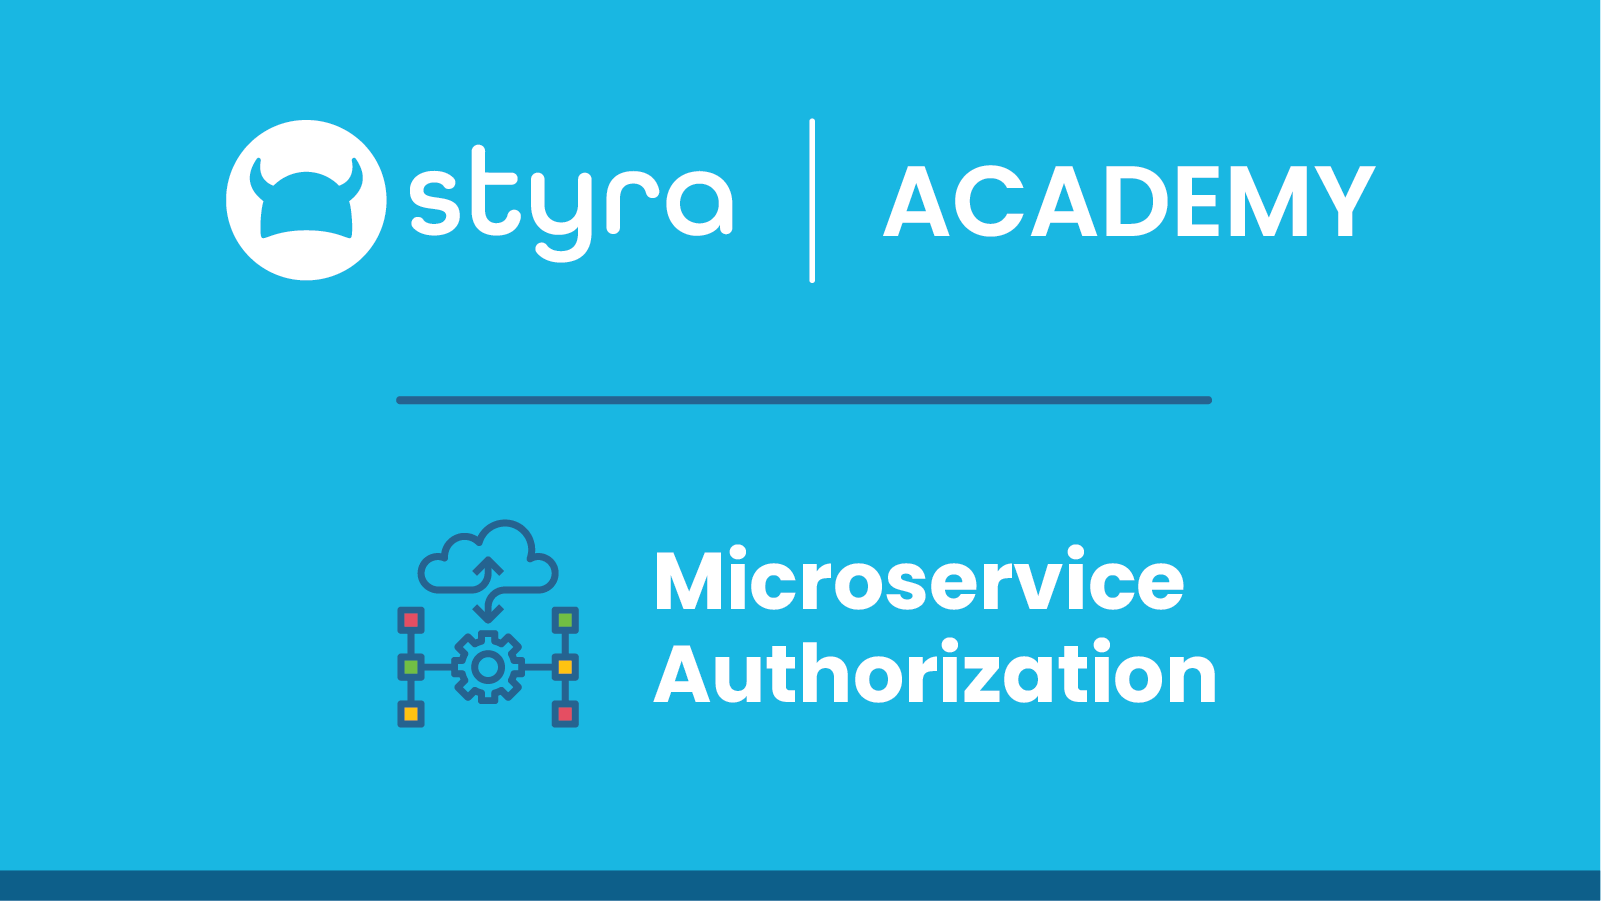 Learn Microservice Authorization